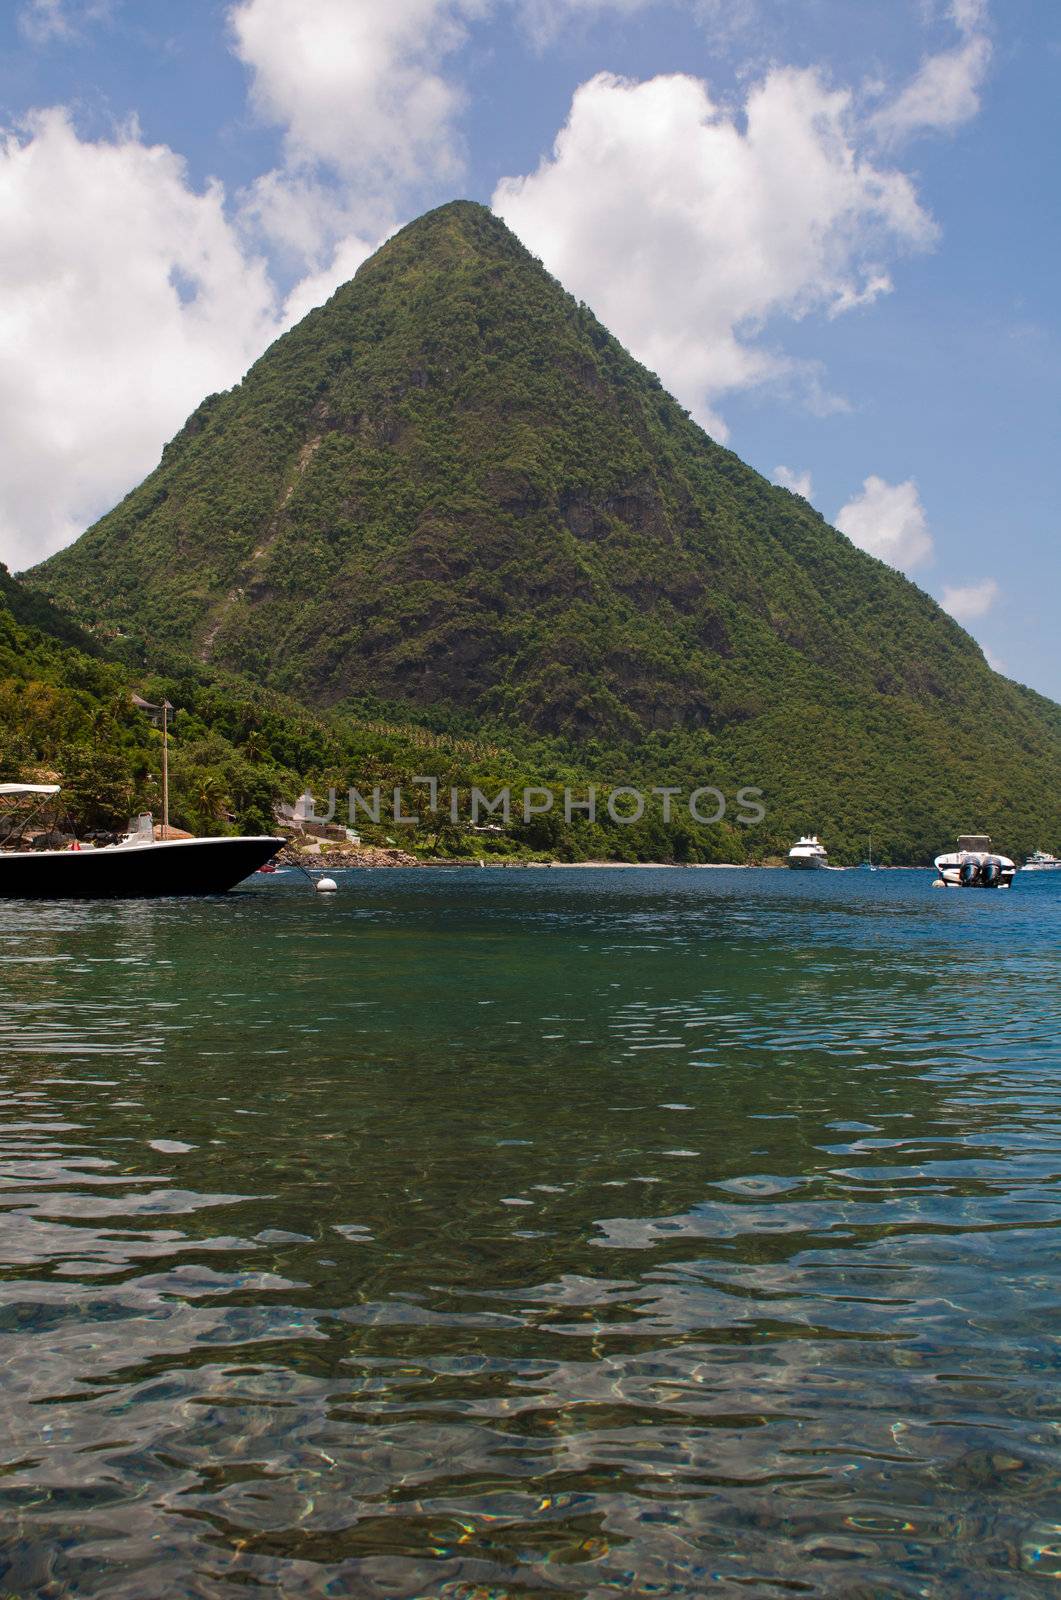 stunning view of the famous Pitons in Saint Lucia, Caribbean (over 700m high)